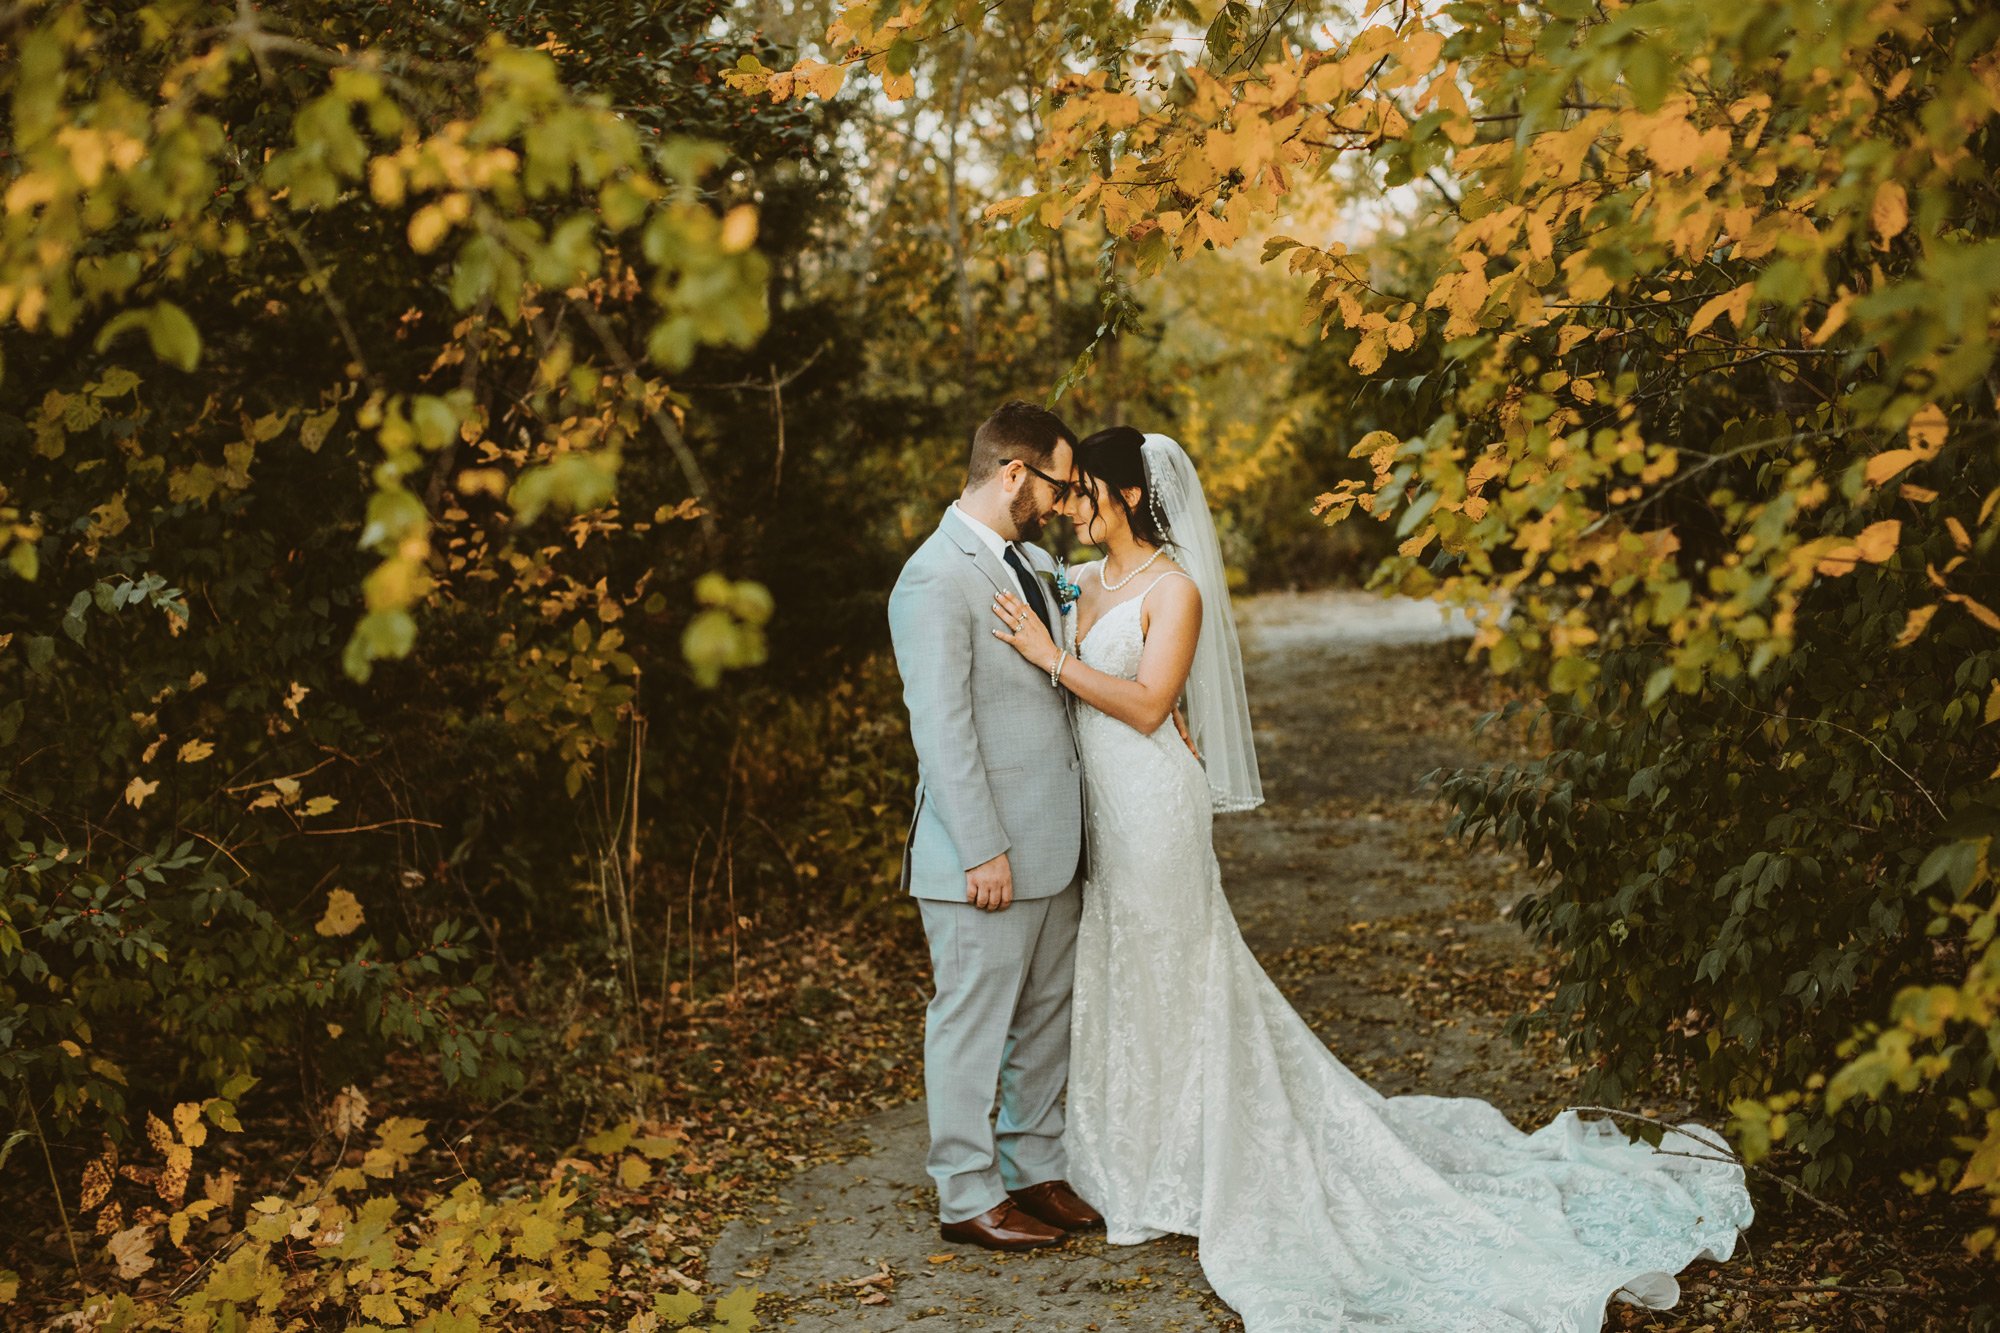  The bride snuggles into the groom’s embrace under an archway of fall leaves by Teala Ward Photography. wedding photos #TealaWardPhotography #TealaWardWeddings #WeddingLocationsIllinois #IllinoisWedding #weddingdetails #weddingphotography #married 